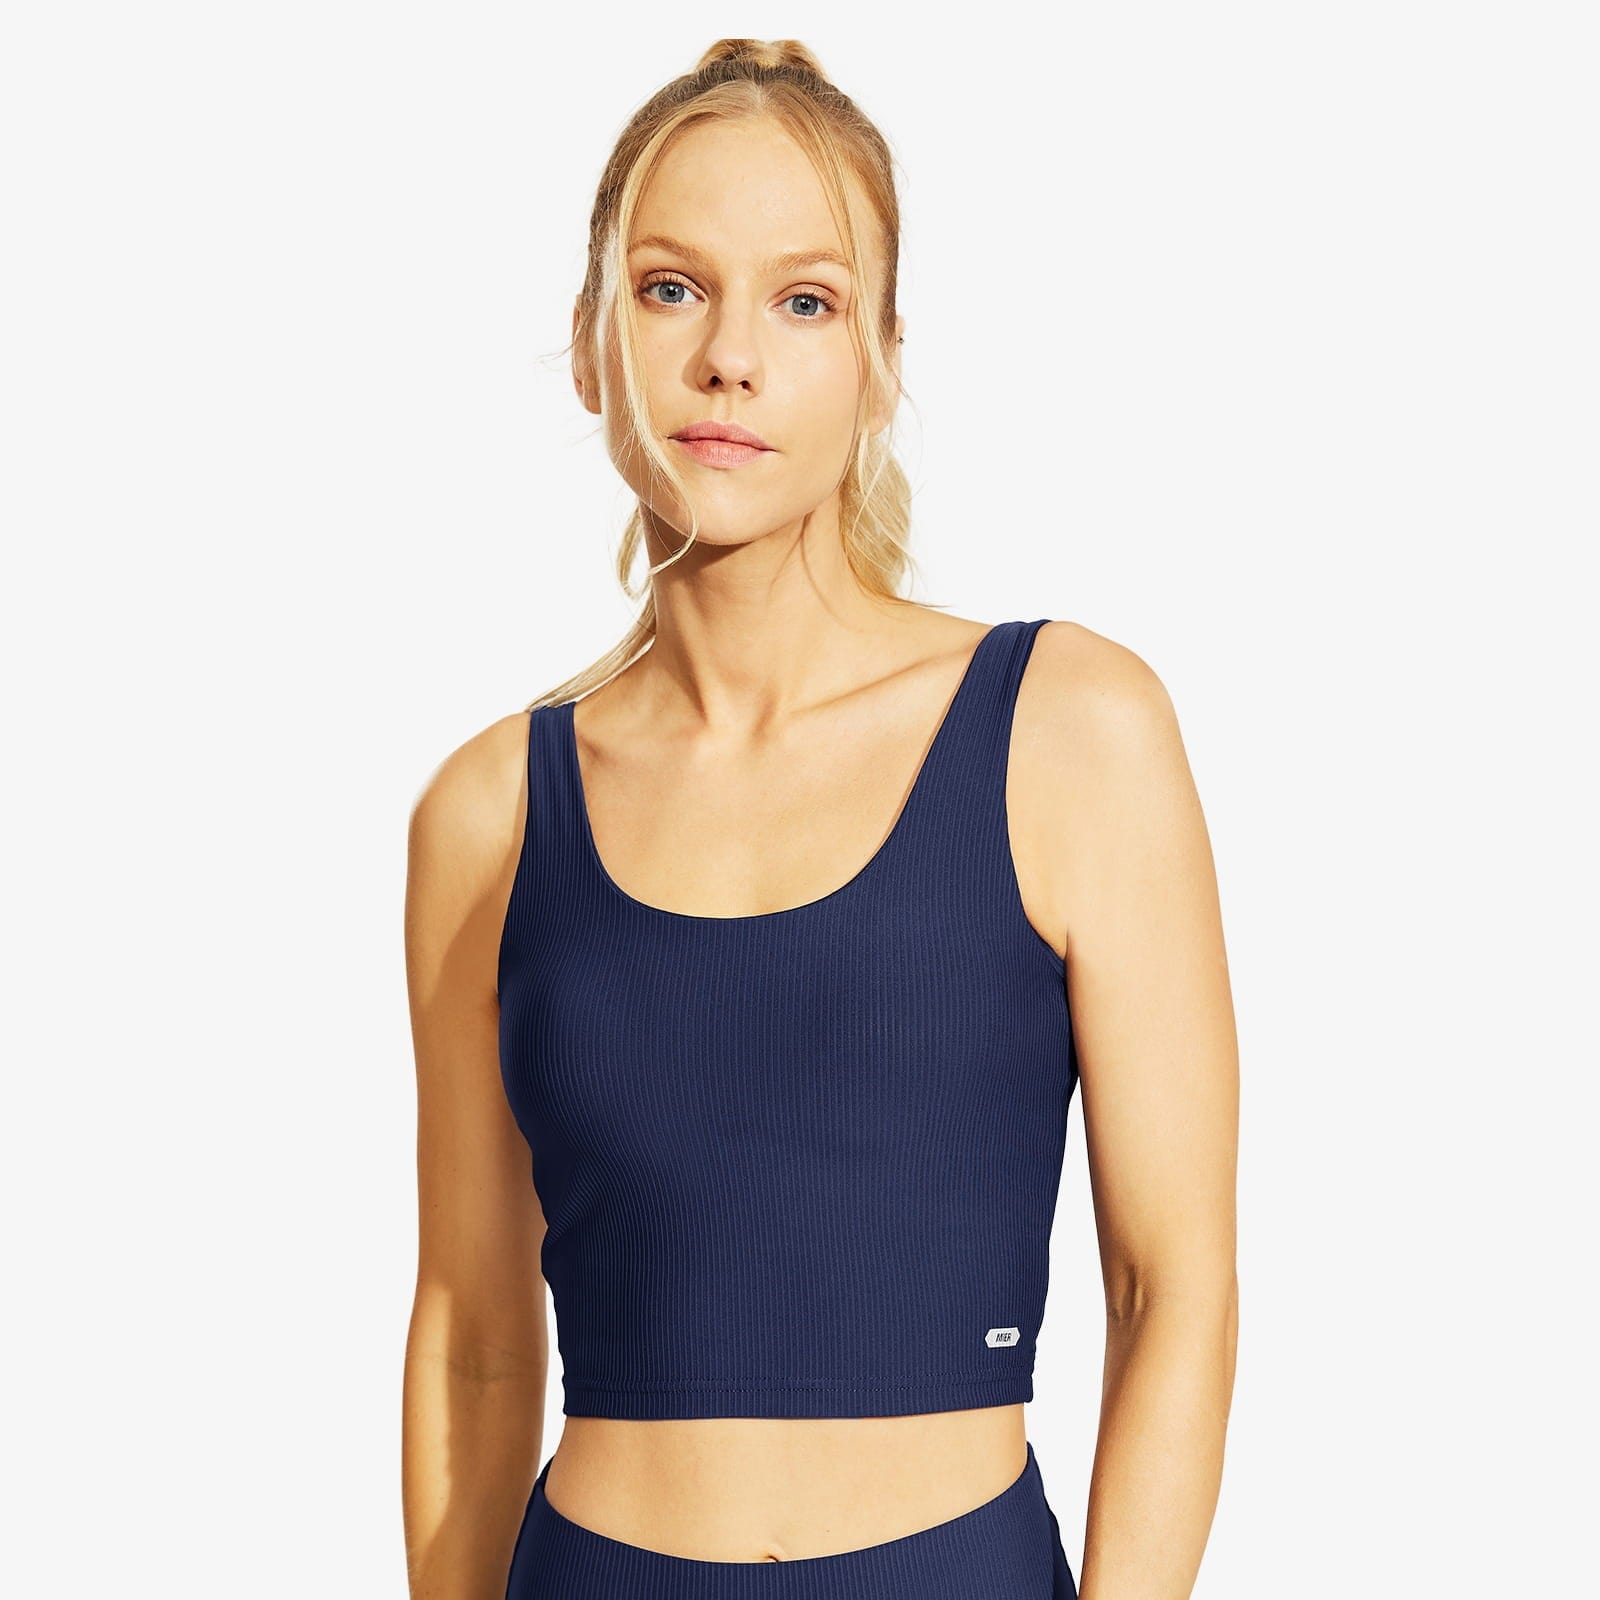 Athletic Hooded Tank Top for Women Activewear Crop Top Sleeveless T-Shirt  Bra Yoga Tops Running Gym Workout Shirts Blue at  Women's Clothing  store